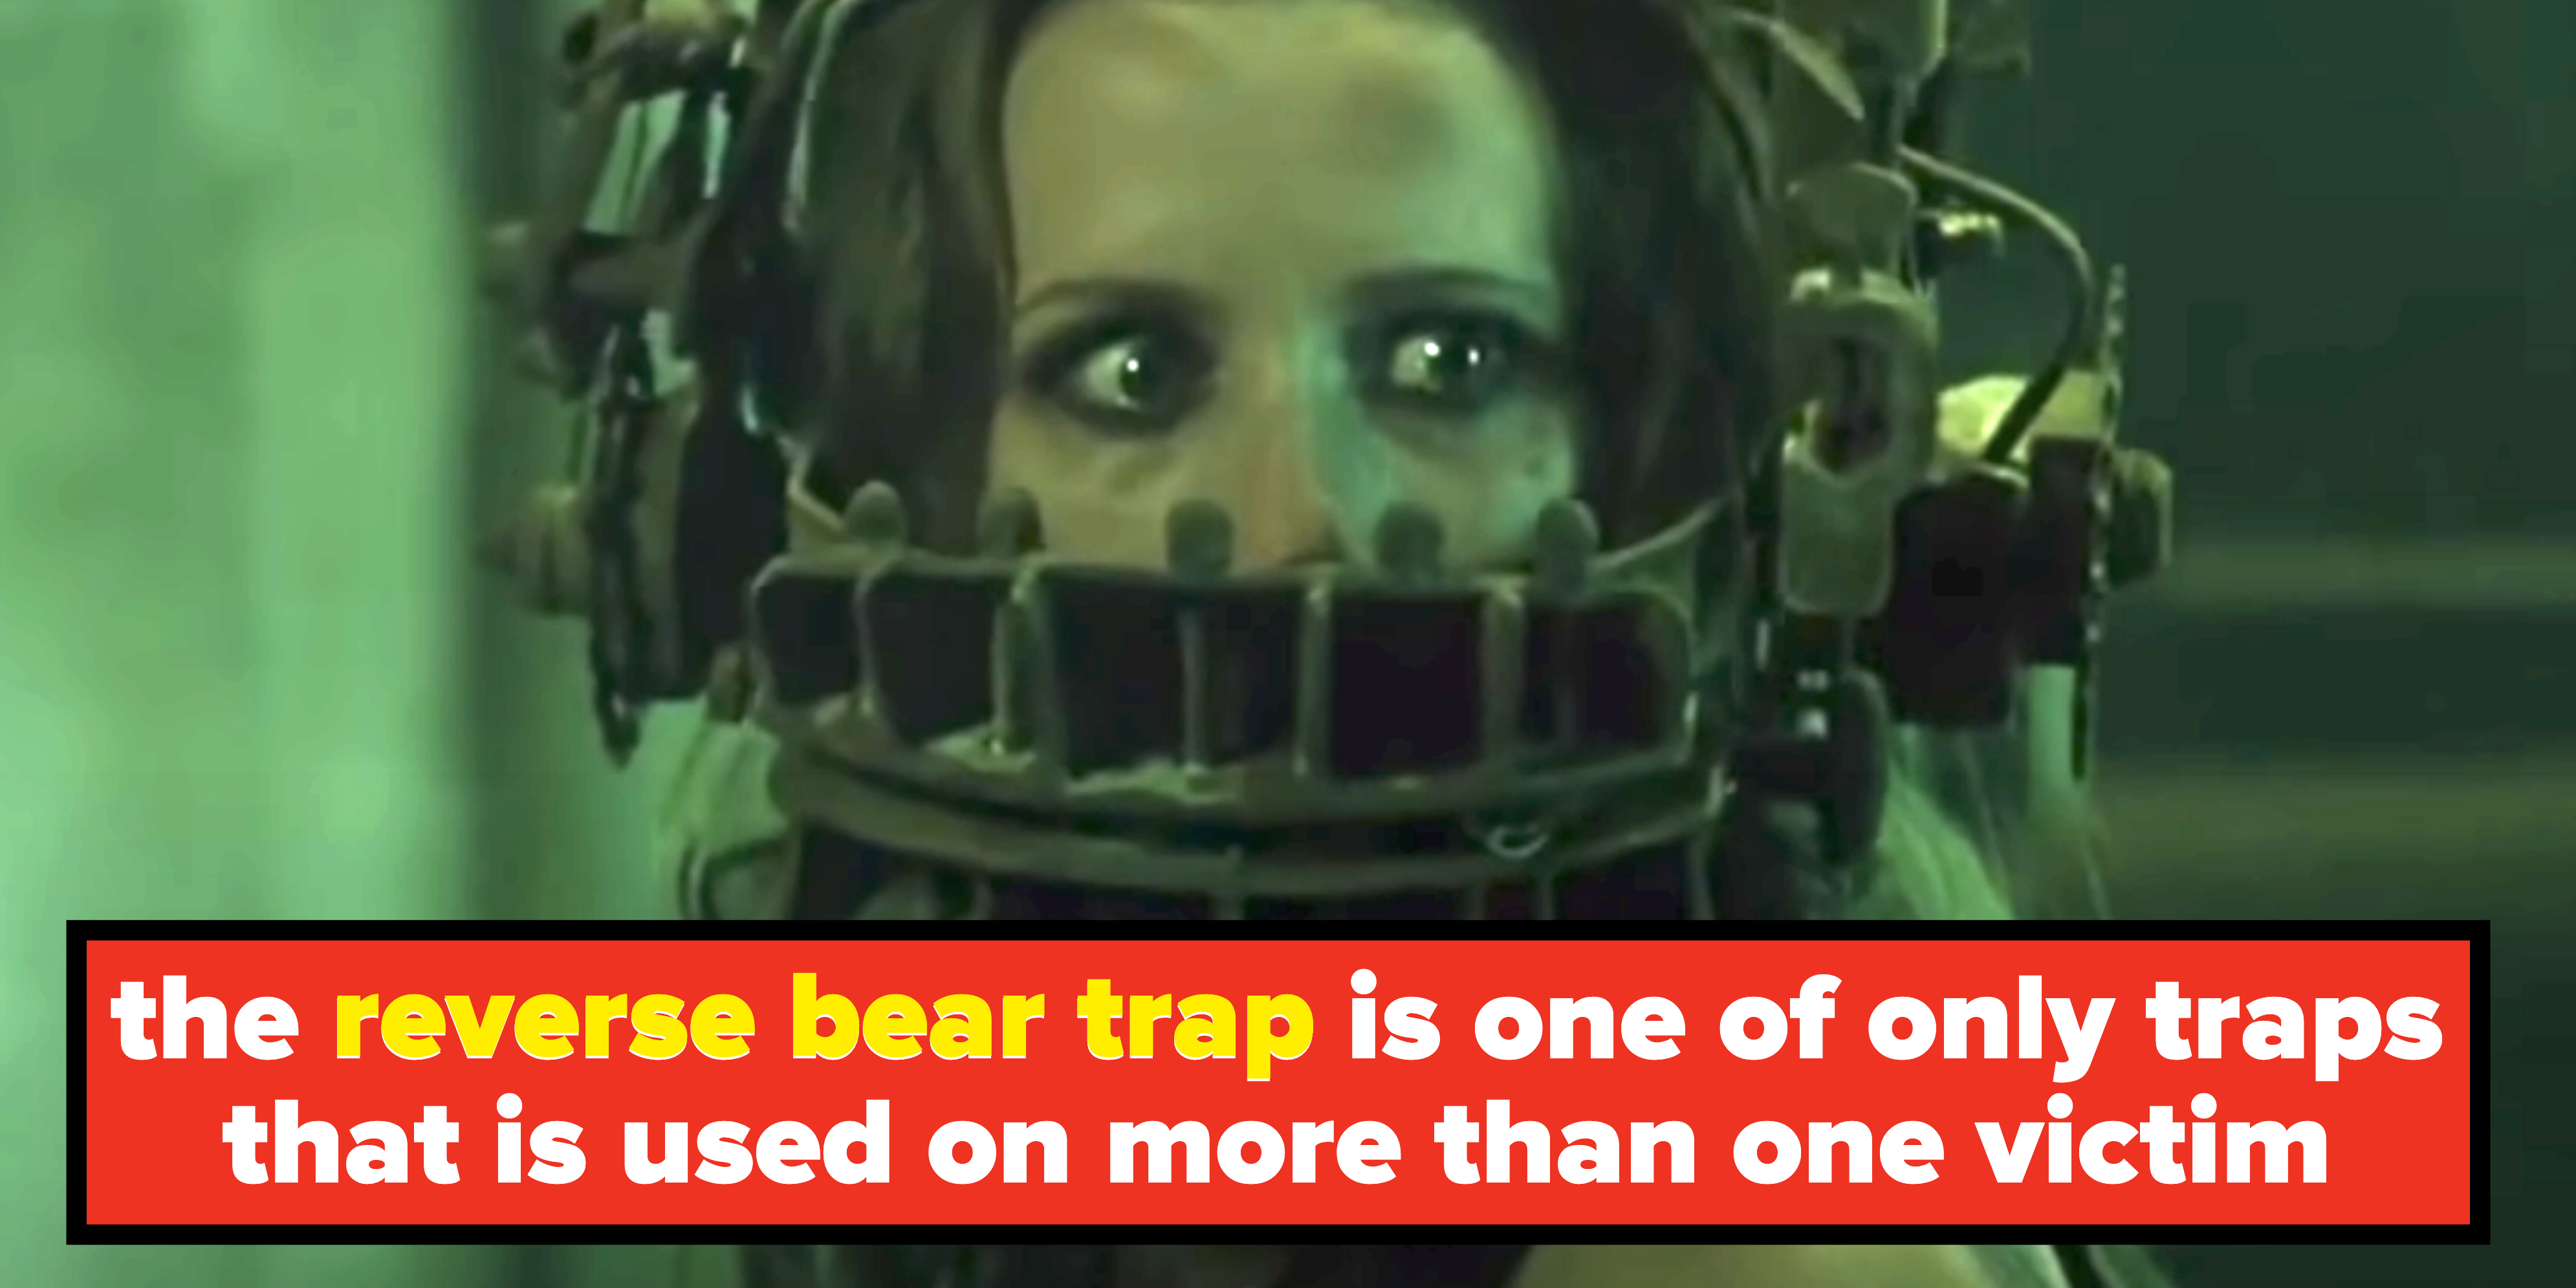 Every Trap in 'Saw' History, Ranked by Chances of Survival - The